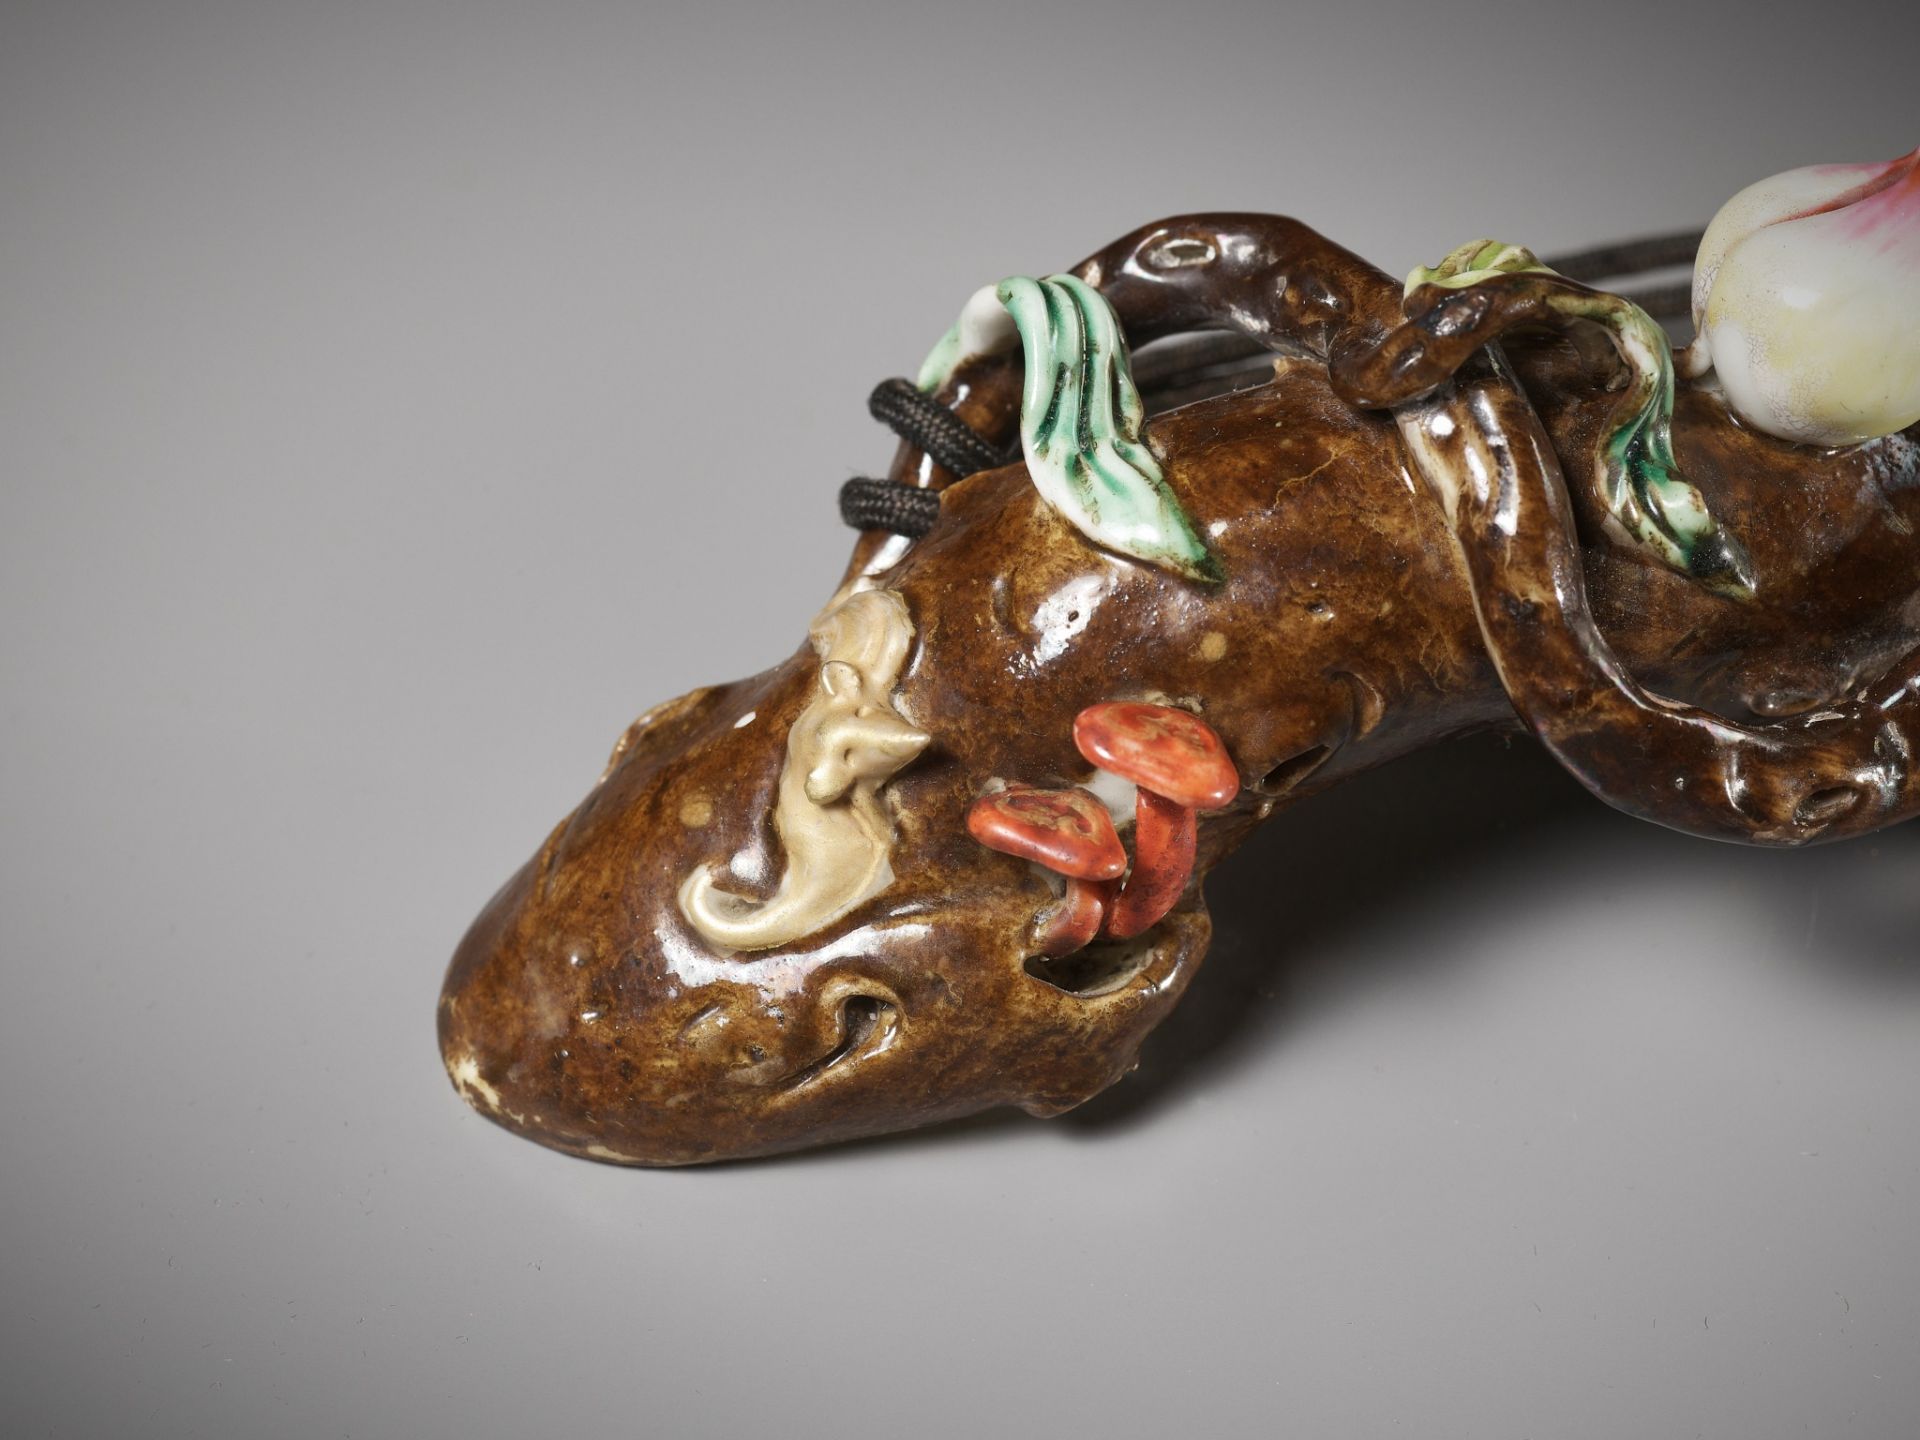 A FAMILLE ROSE PORCELAIN 'LINGZHI' RUYI SCEPTER, MID-QING DYNASTY - Image 3 of 12